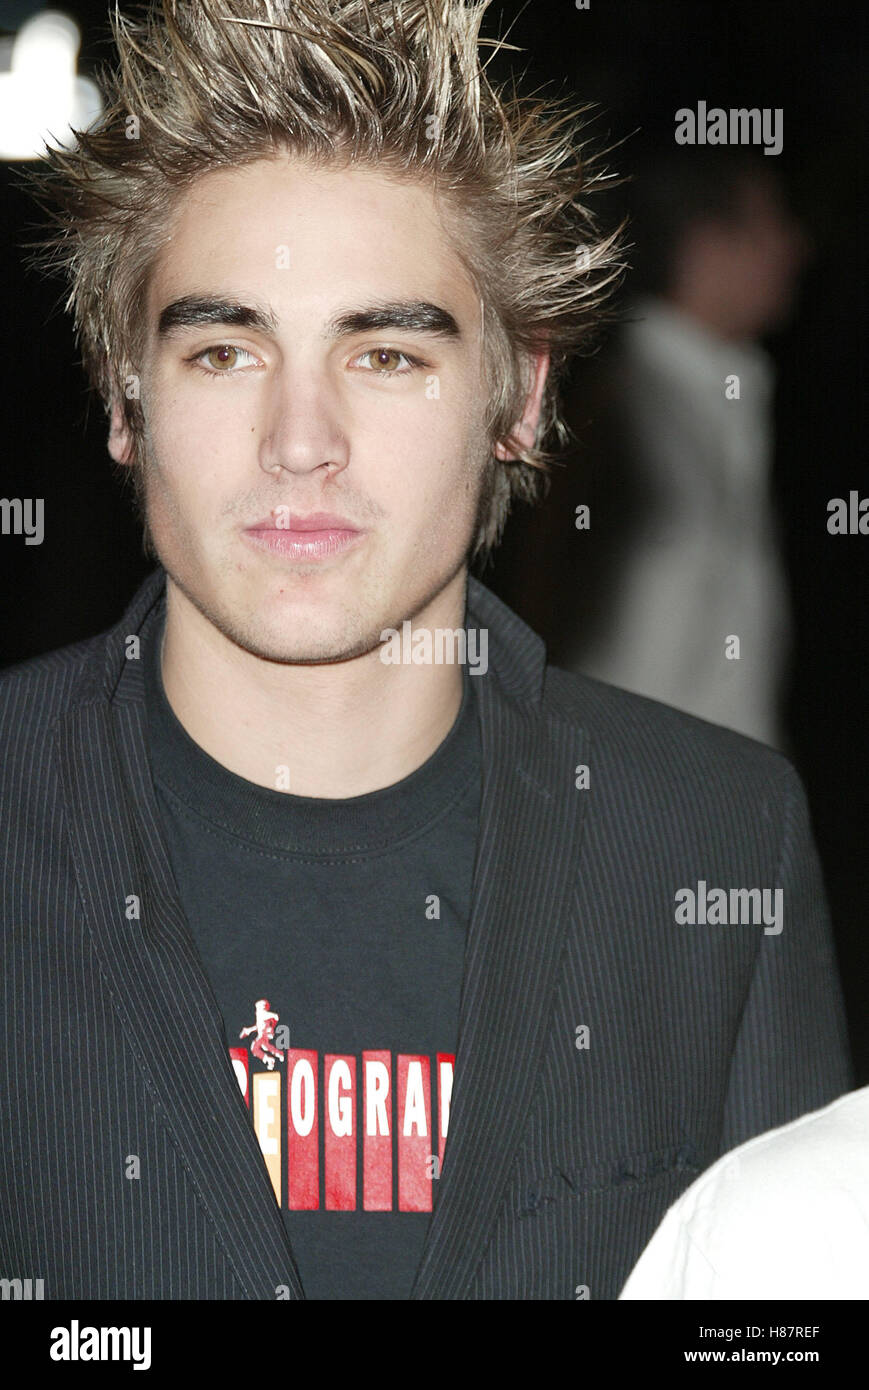 charlie-simpson-lord-of-the-rings-premiere-200-odeon-leicester-square-H87REF.jpg